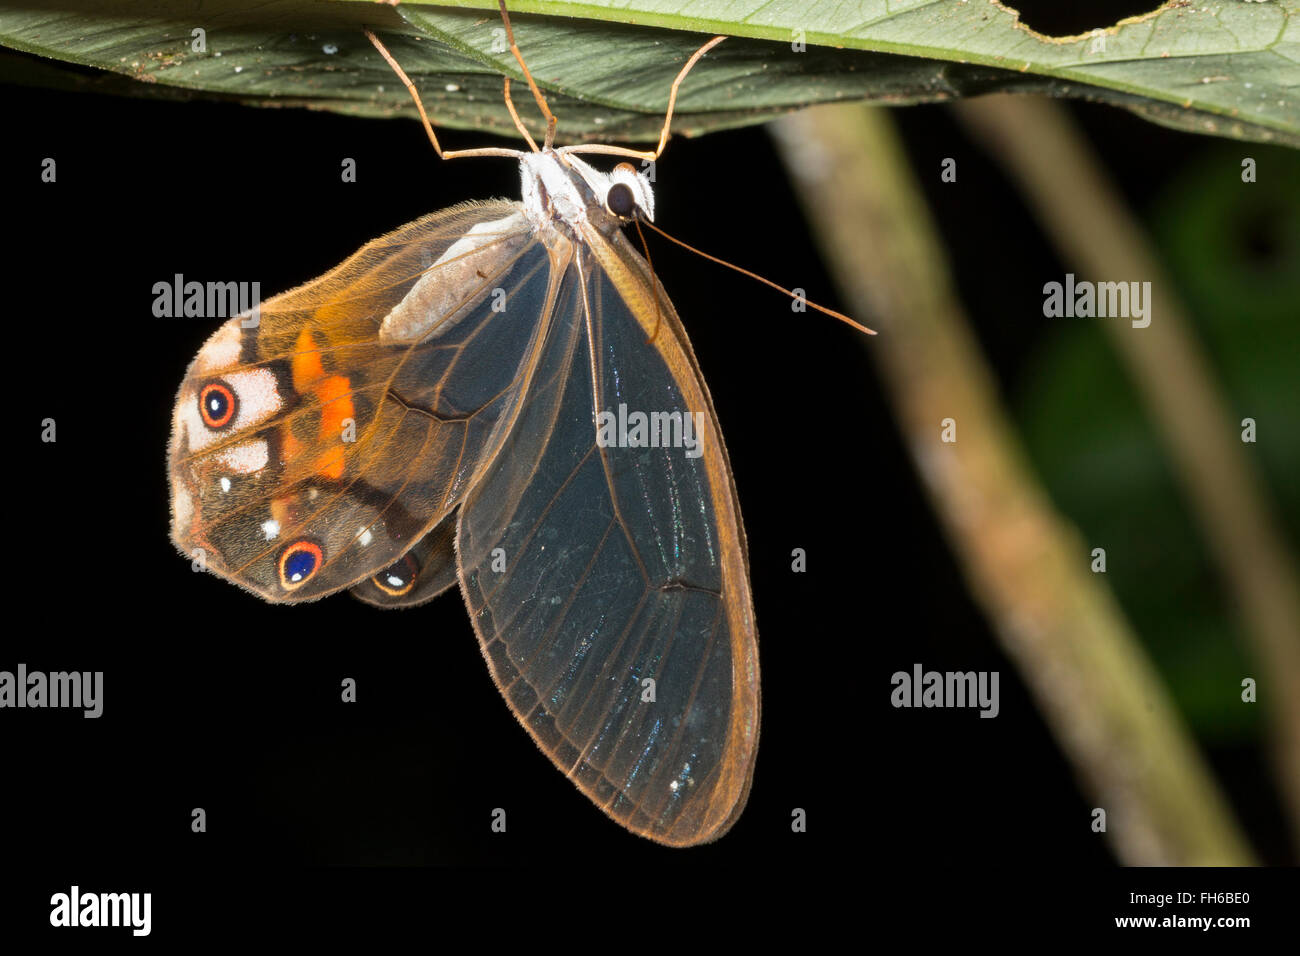 Clearwing butterfly (Haetera piera) Family Satyridae roosting on a leaf at night in the rainforest understory, Pastaza, Ecuador Stock Photo